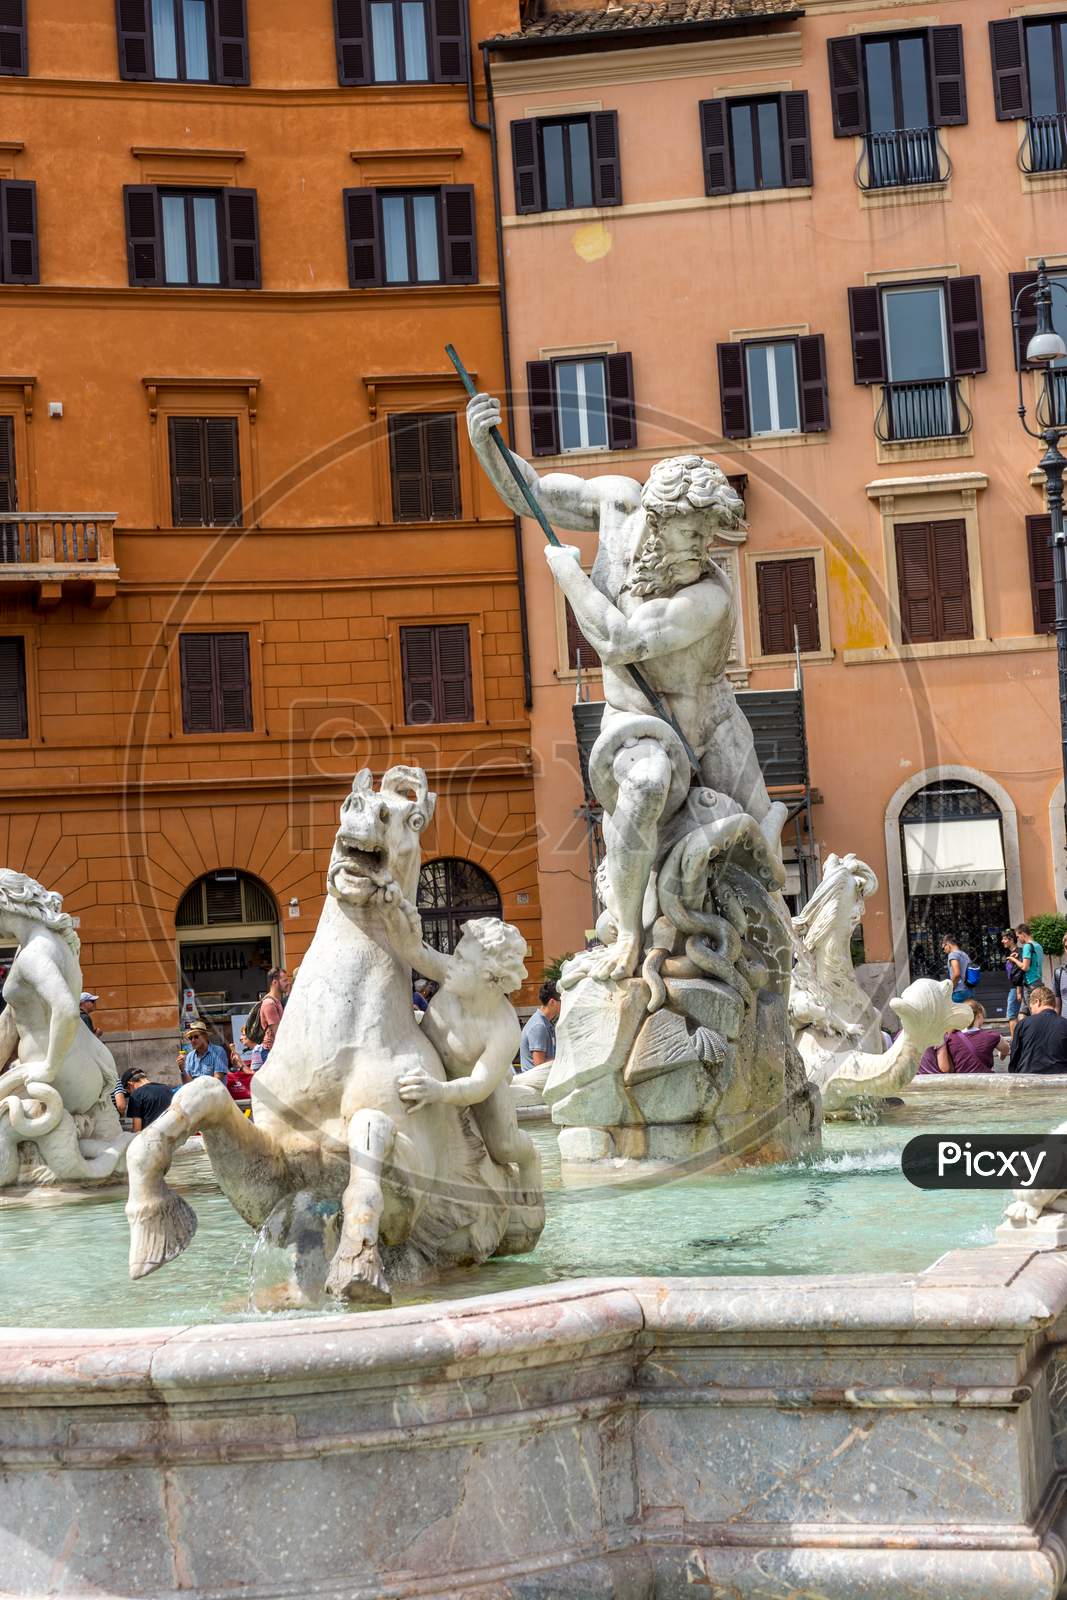 Rome, Italy - 24 June 2018: The Fountain Of Neptune, Fontana Del Nettuno, Is A Fountain Located At The North End Of The Piazza Navona. It Was Once Called "Fontana Dei Calderari